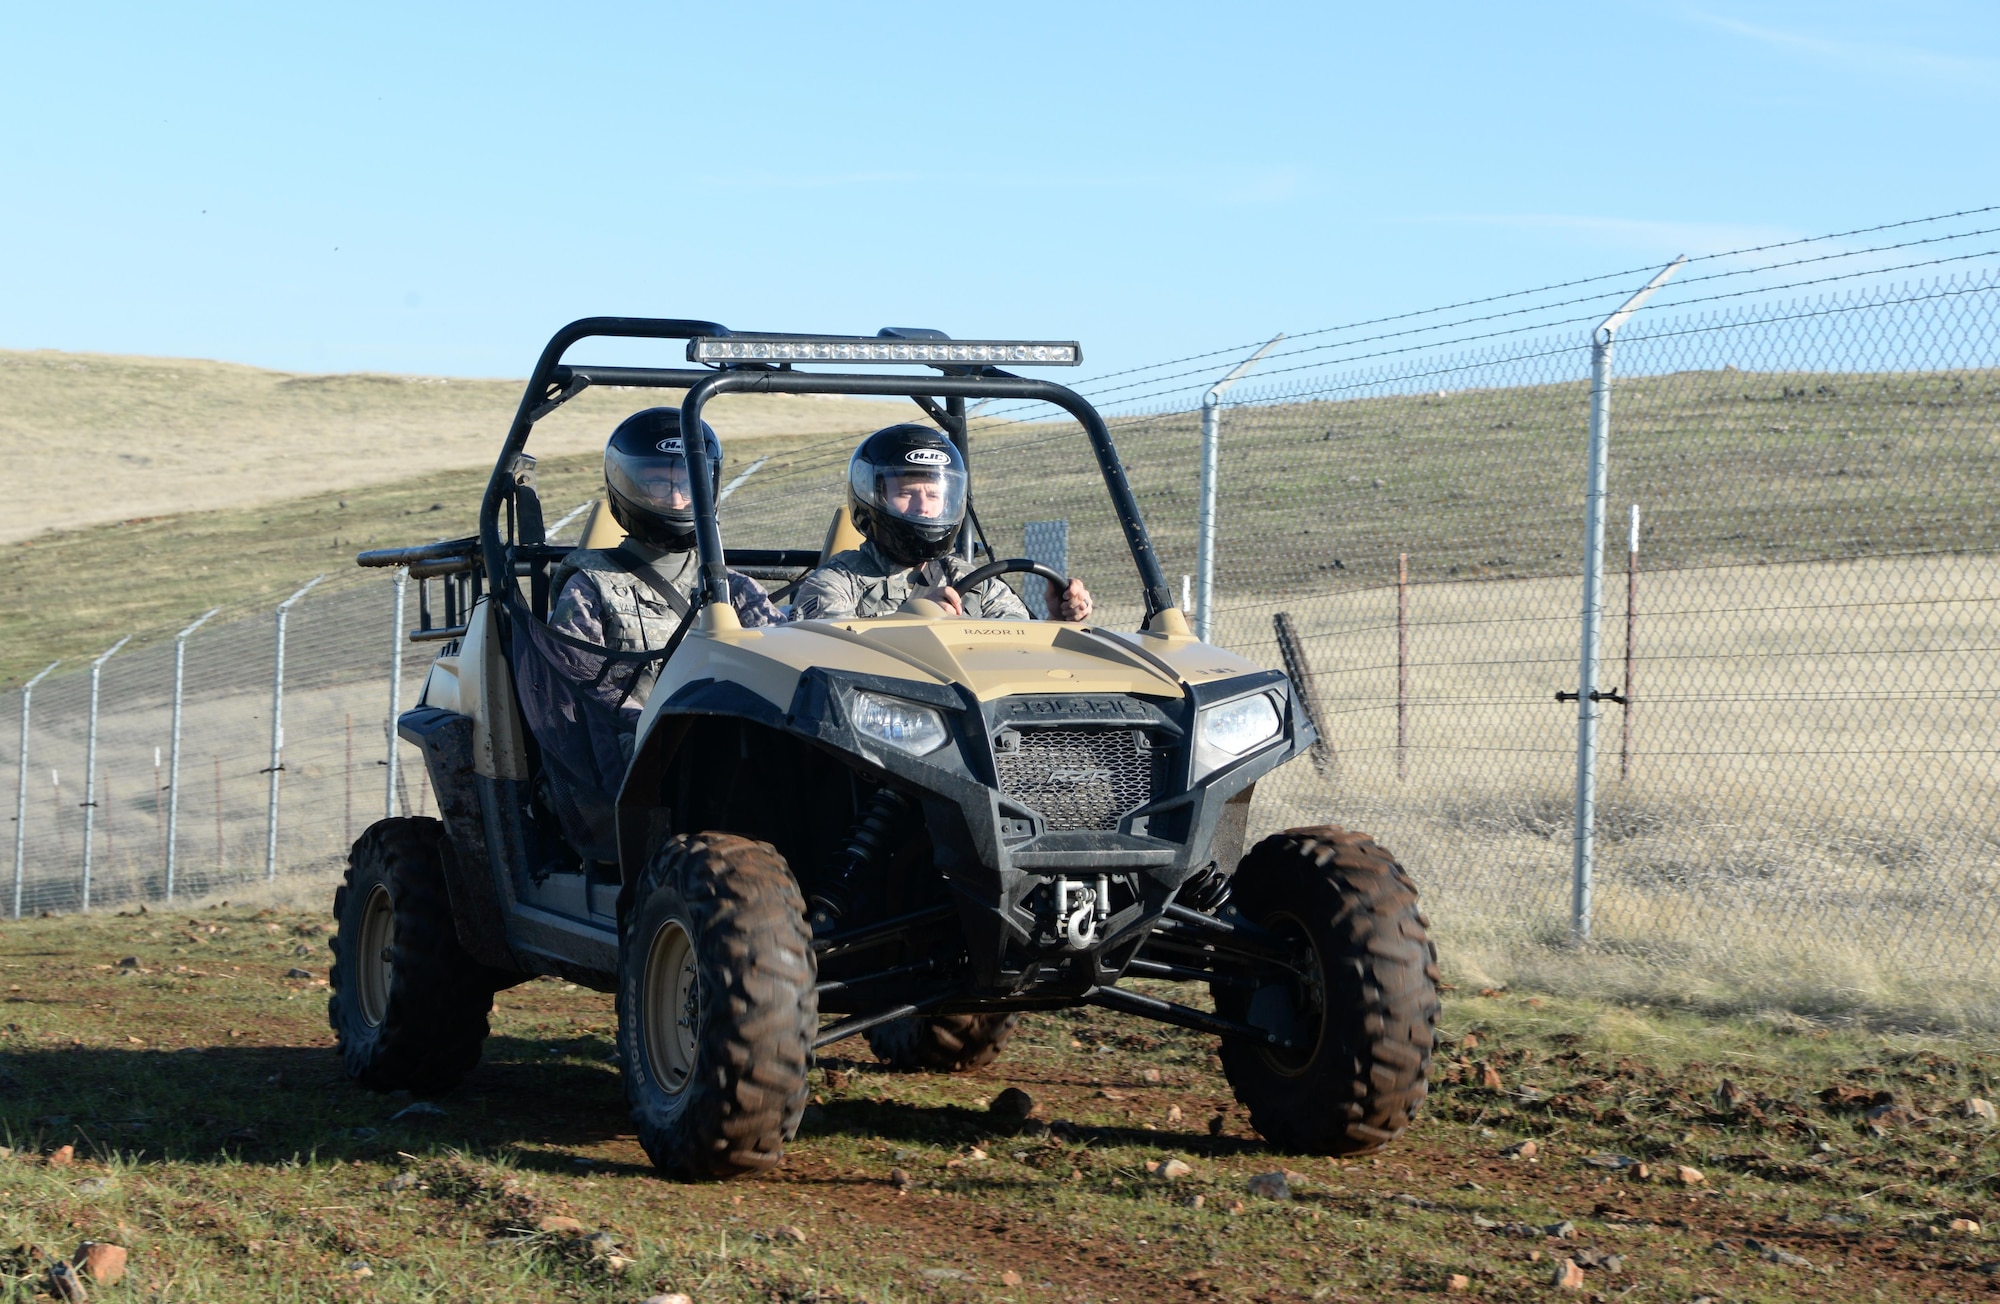 Senior Airman David Gill, 9th Security Forces Squadron base defense operation controller, and Airman 1st Class Luis Valentin, 9th SFS installation entry controller, drive an all-terrain vehicle alongside a fence line Nov. 4, 2016, at Beale Air Force Base, California. The perimeter of Beale is 26 miles and is broken up into six sectors. (U.S. Air Force photo/Airman Tristan D. Viglianco)